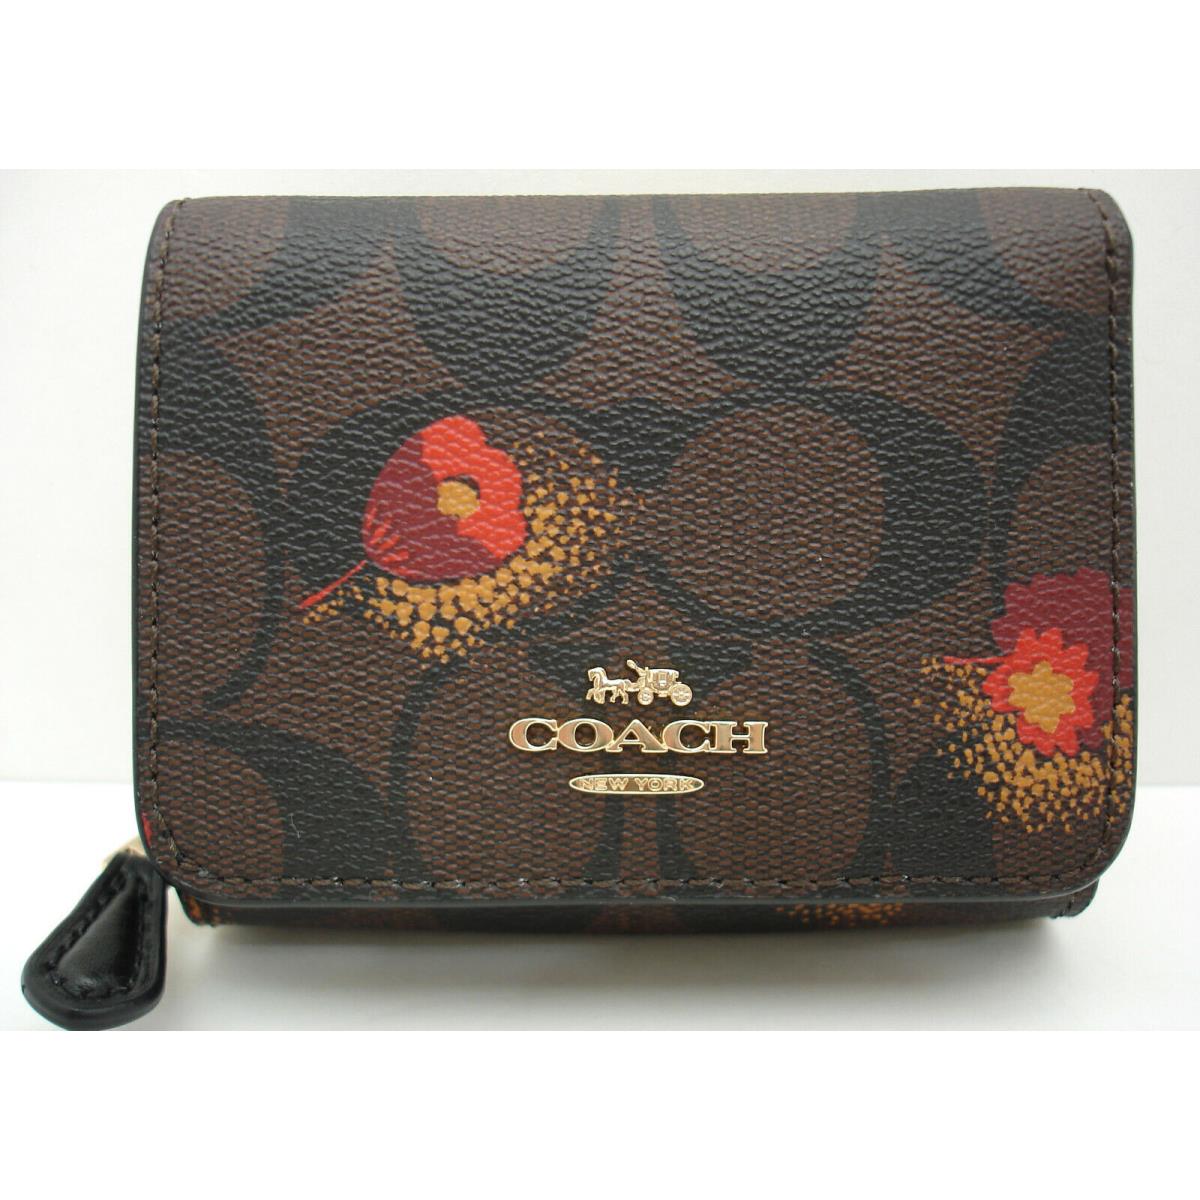 Coach Signature Canvas Poppy Floral Print Trifold Wallet Brown Black/gold - Exterior: Poppy Floral Print